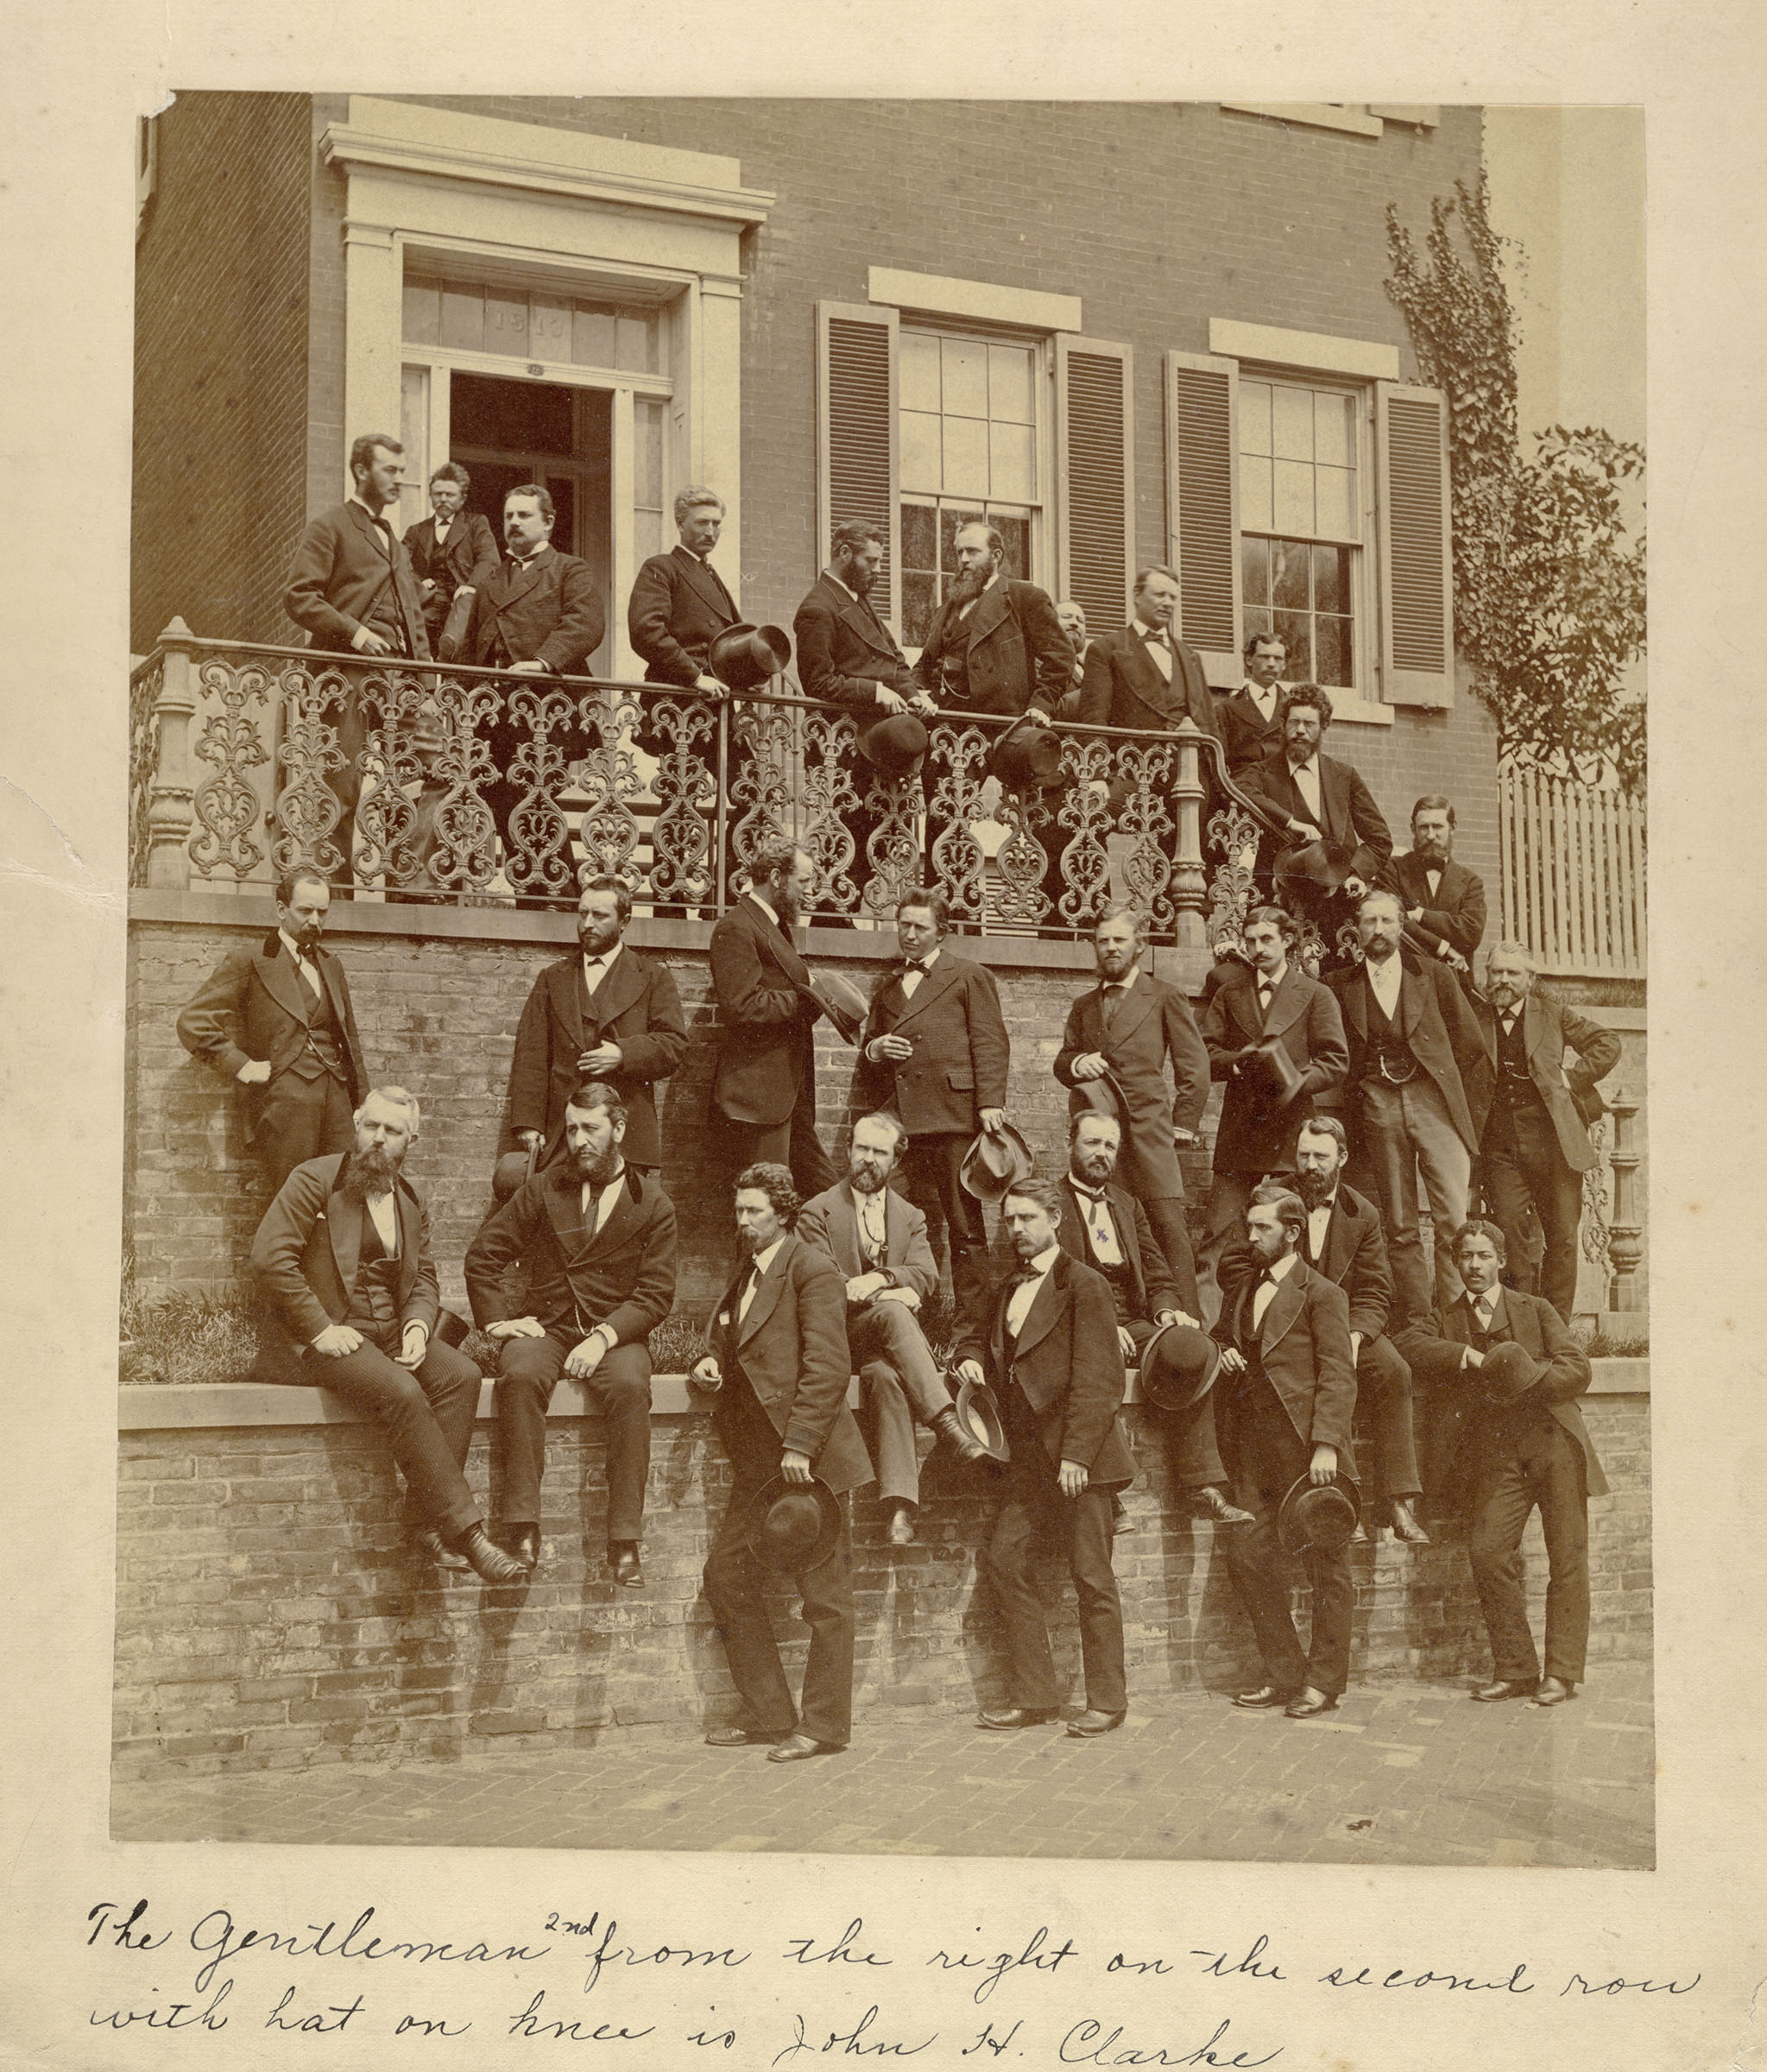 Group of men in suits arranged around an outside porch and grounds